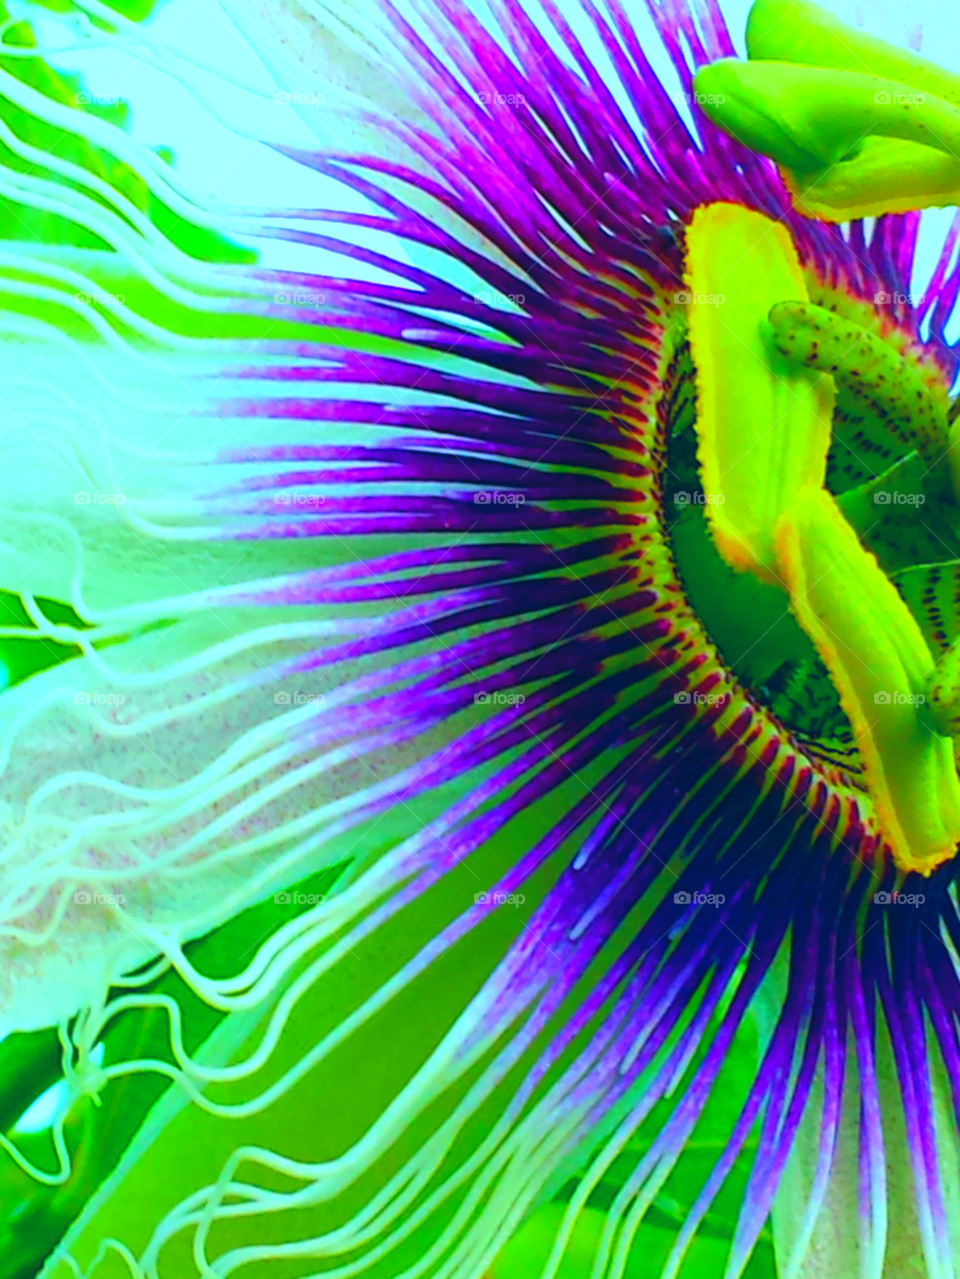 "Passion Flower Beauty"